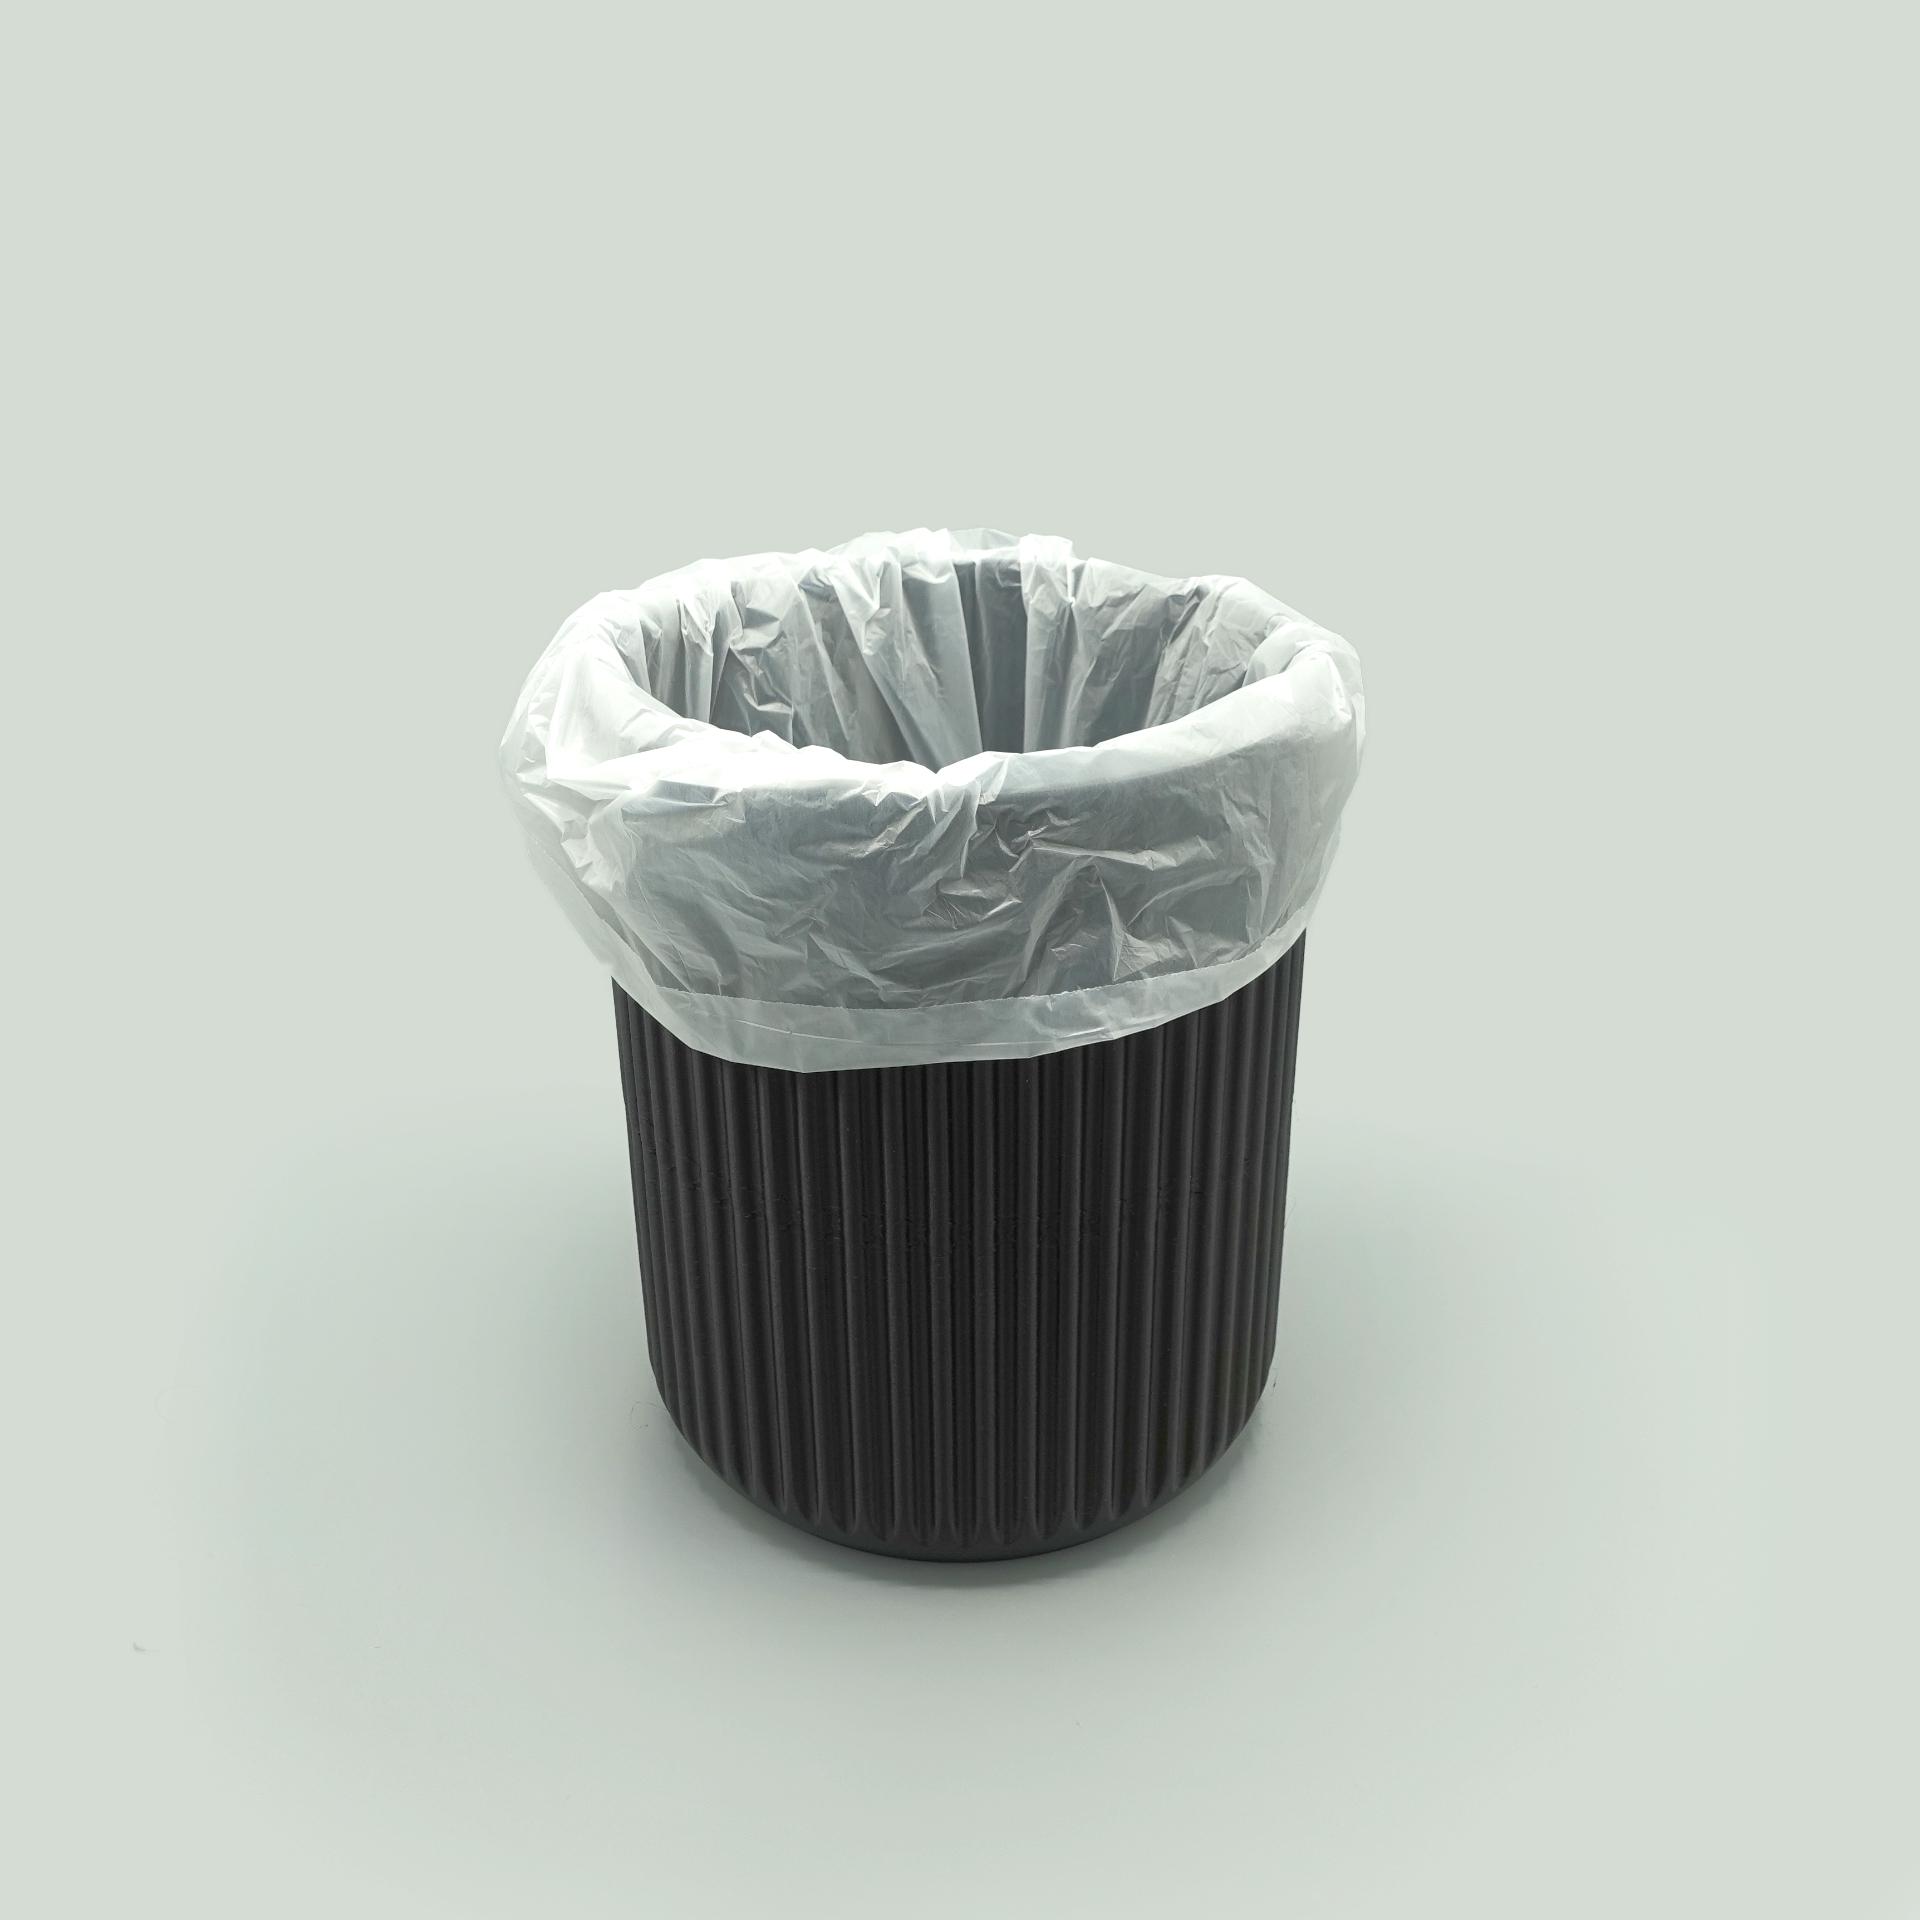 Trash can with swing lid 3d model